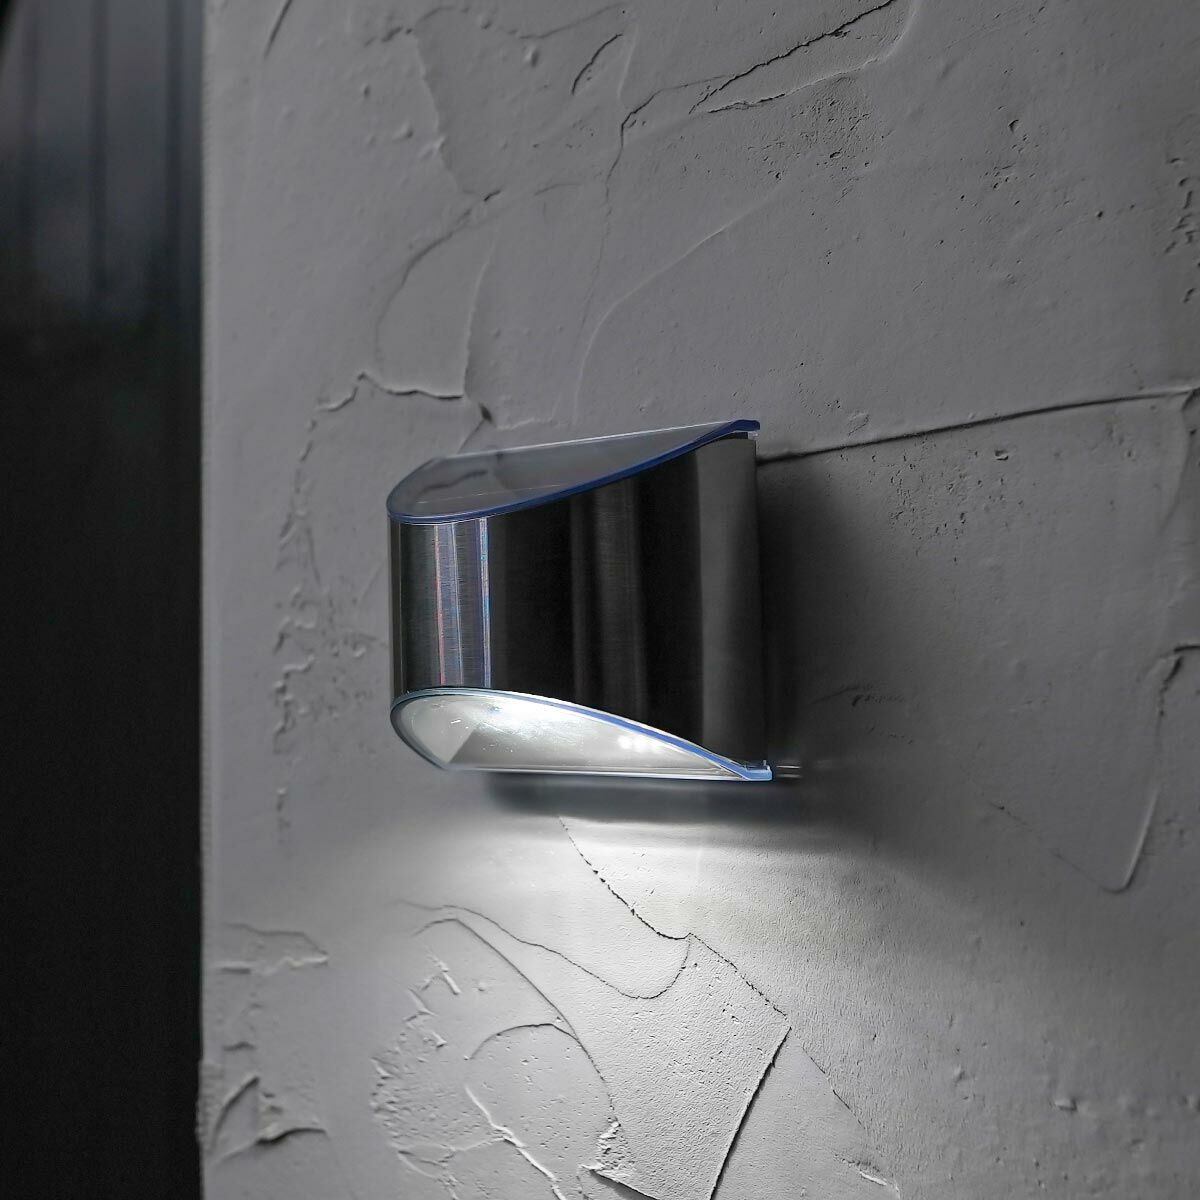 Solar Stainless Steel Welcome Wall Light